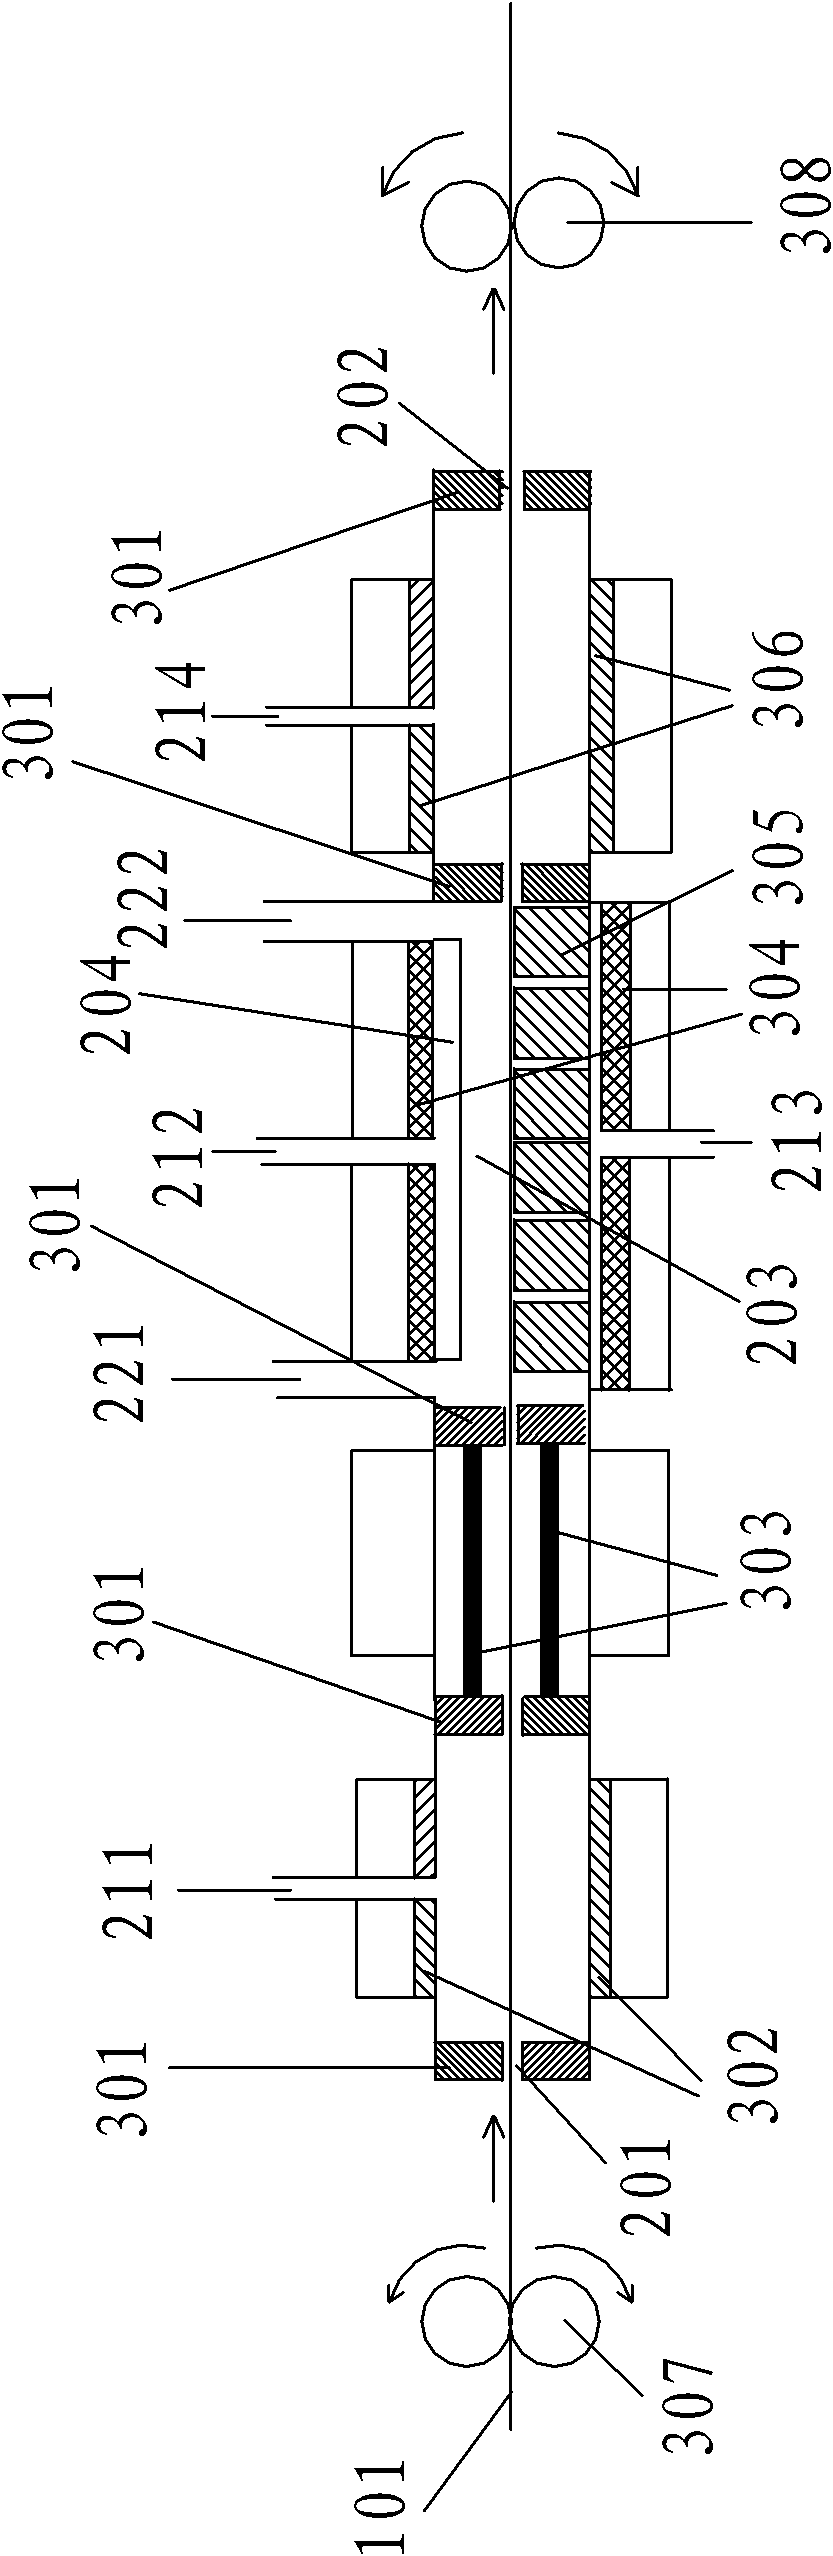 Selenylation furnace for treating and preparing CIGS (Copper Indium Gallium Diselenide) solar cell absorbing layer and manufacturing method thereof